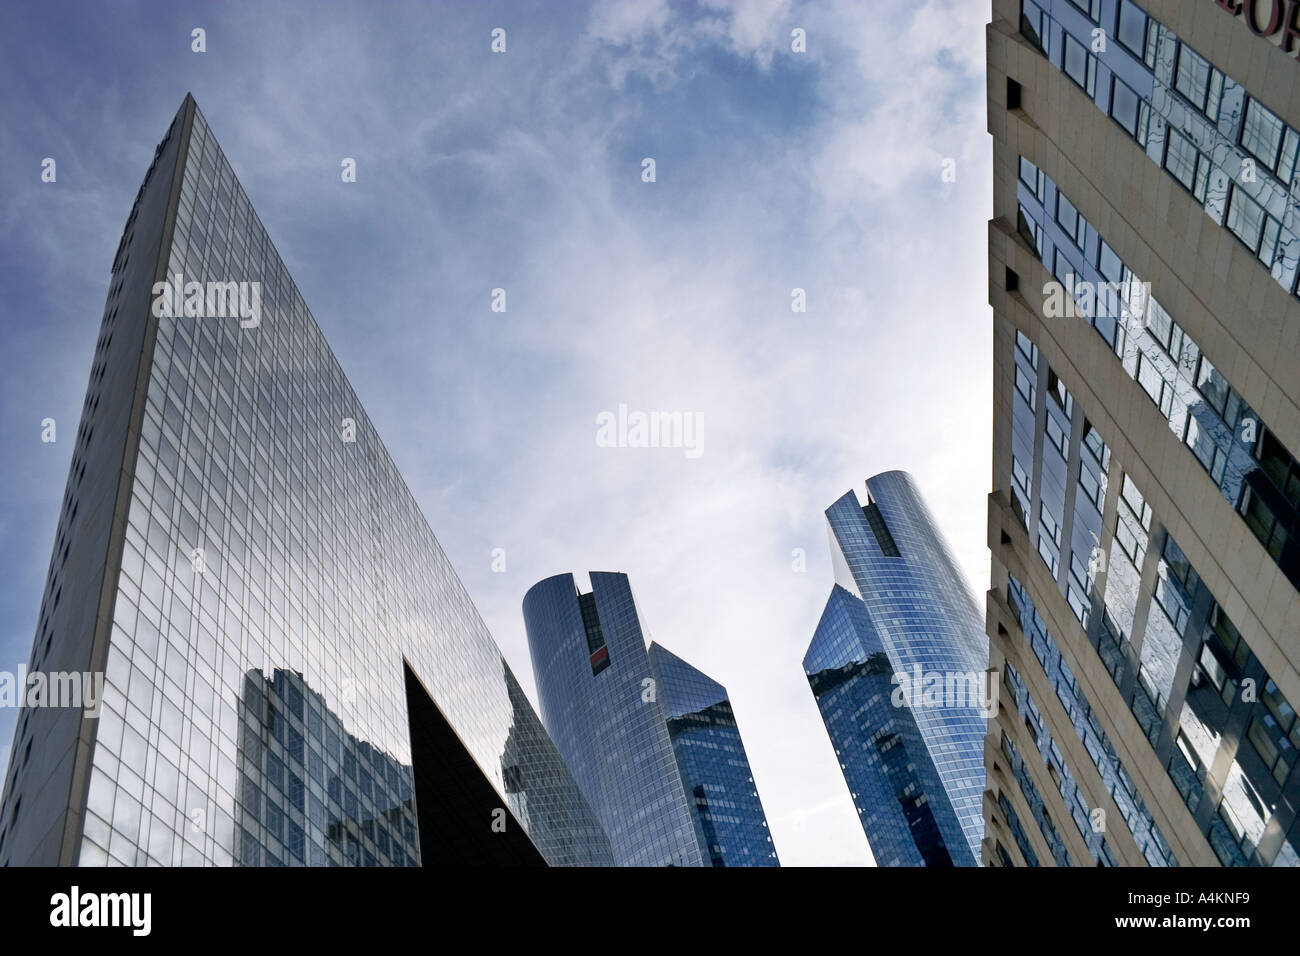 Business offices skyscrapers seemingly converging La Defence area Paris France Europe wide angle view from the ground Stock Photo